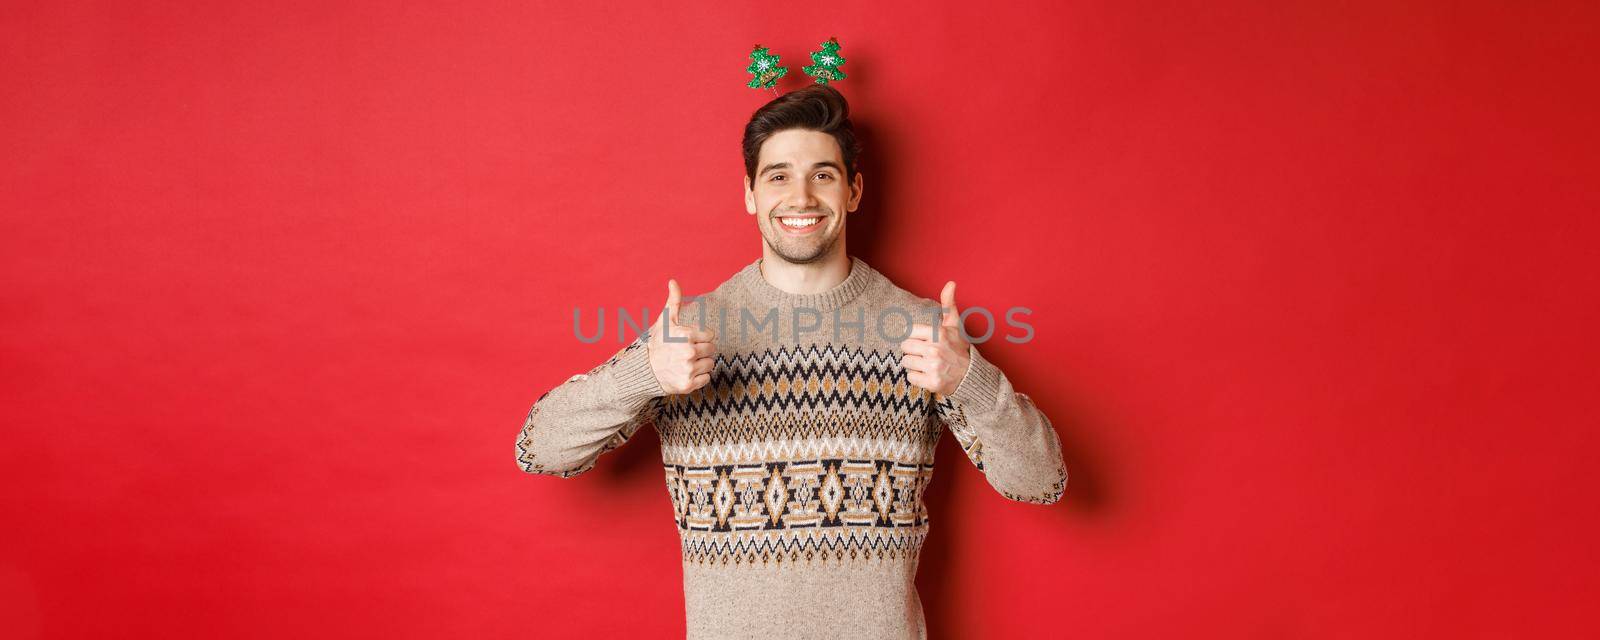 Concept of winter holidays, christmas and celebration. Cheerful bearded guy in sweater, showing thumbs-up in approval and smiling, enjoying new year party, red background.